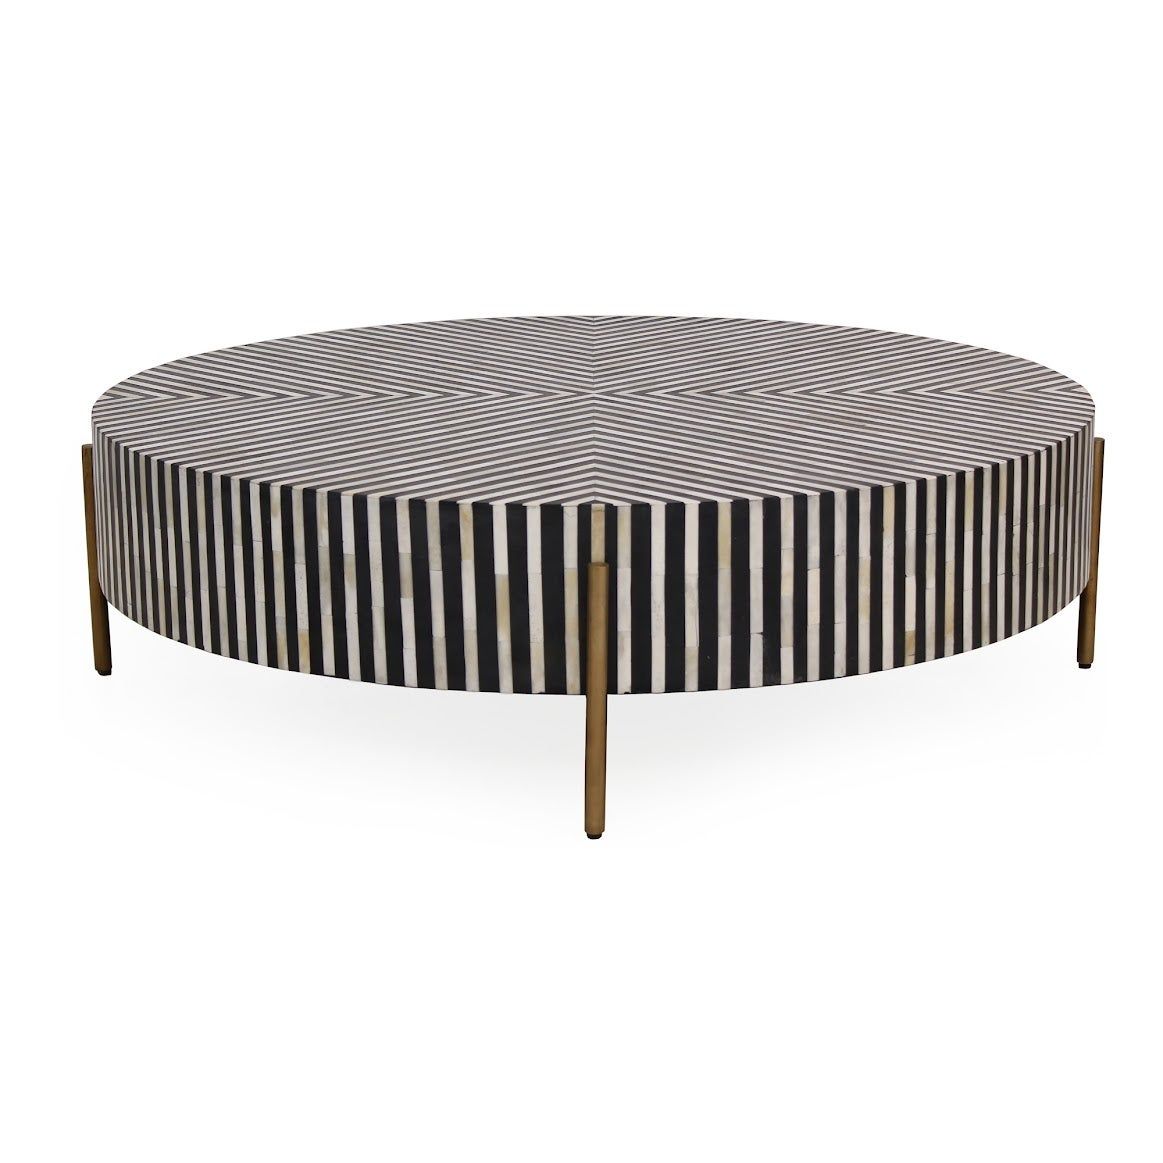 Antiqued Art Deco Coffee Tables